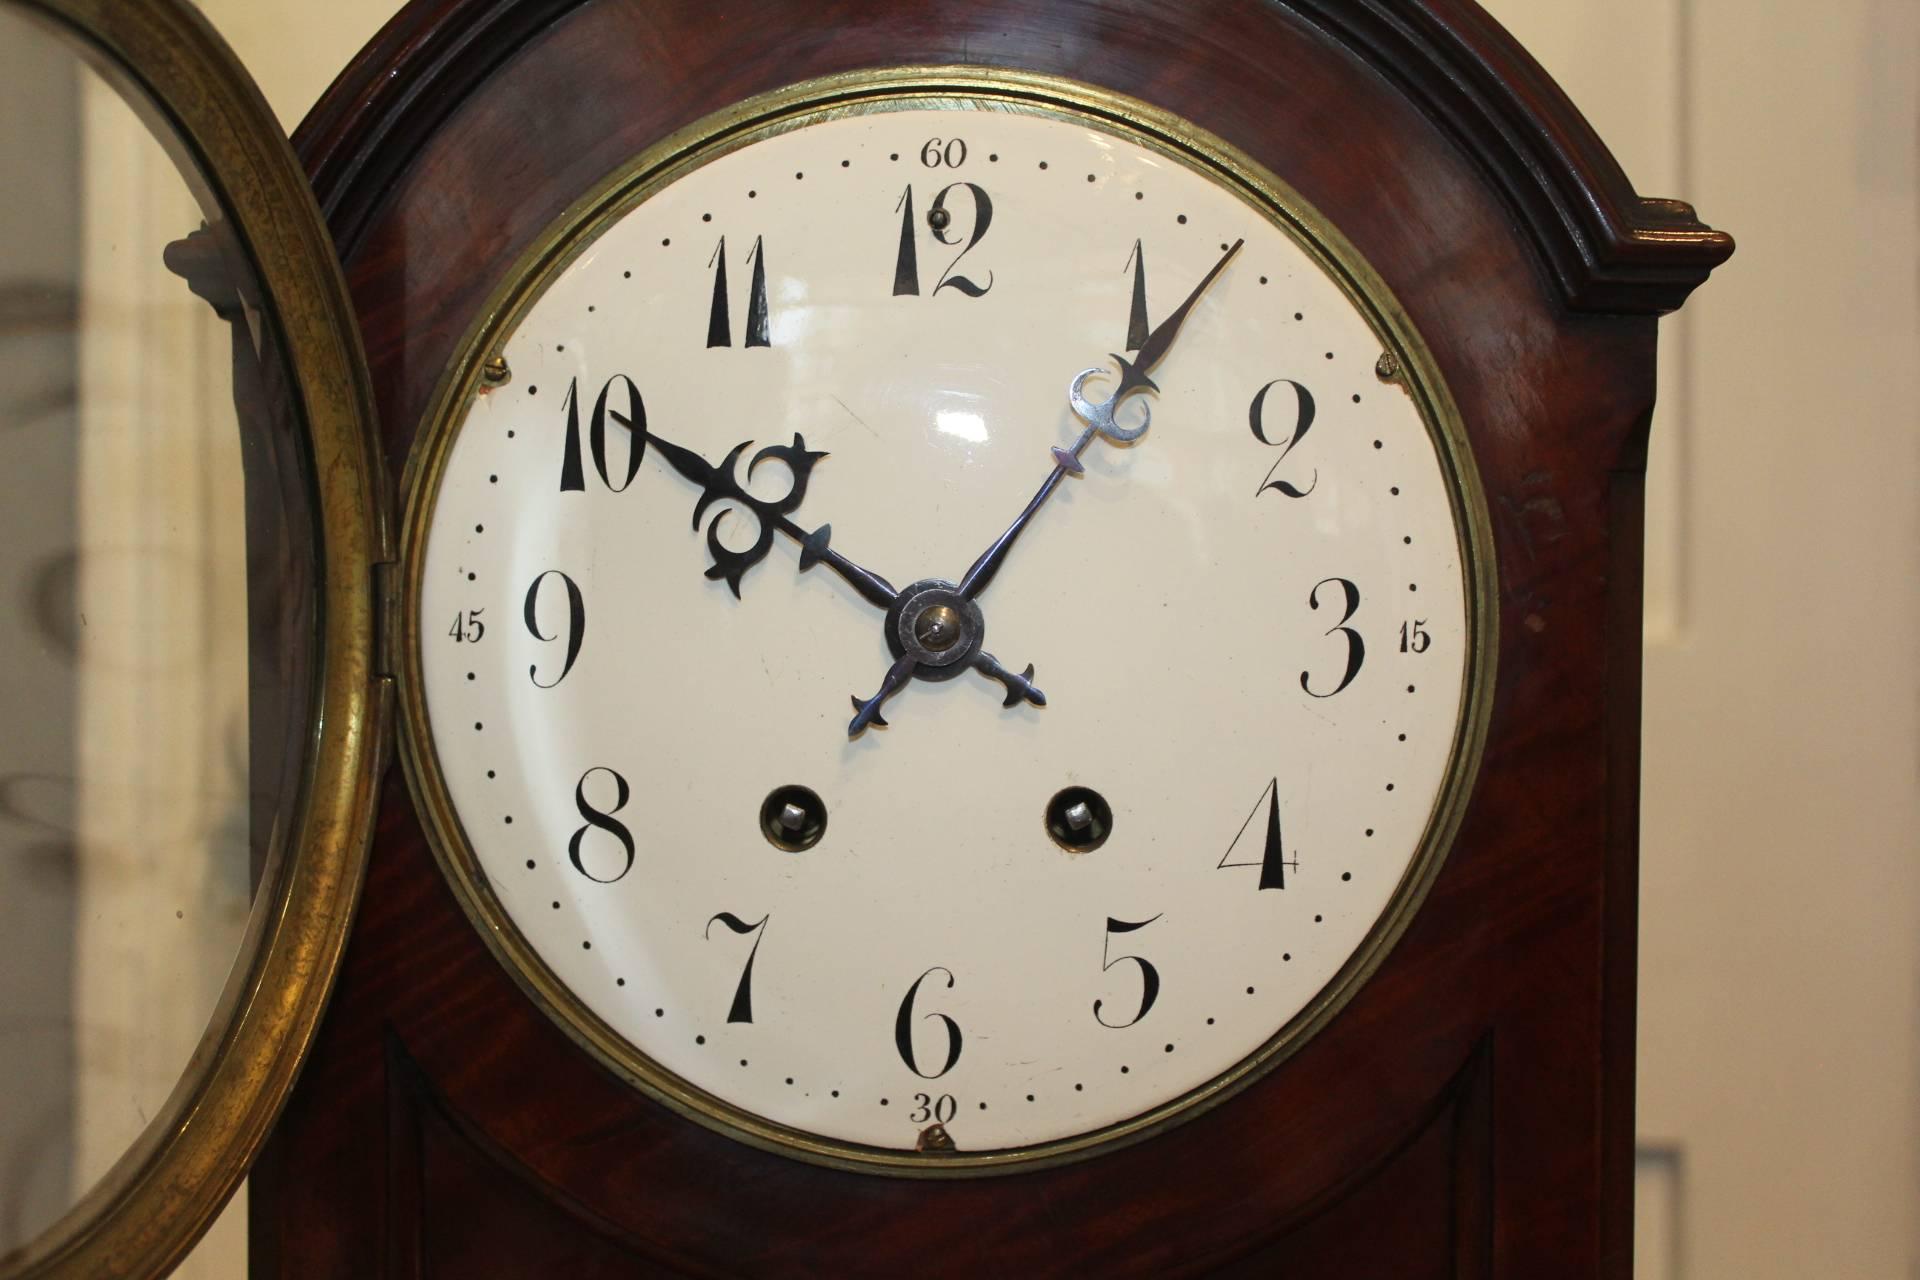 Edwardian table or mantel clock, circa 19000

This impressive, mahogany cased clock has a break arch case with recessed quadrant panels and a moulded plinth. The crisp white enamel dial has beautifully styled Arabic numerals which are very easily